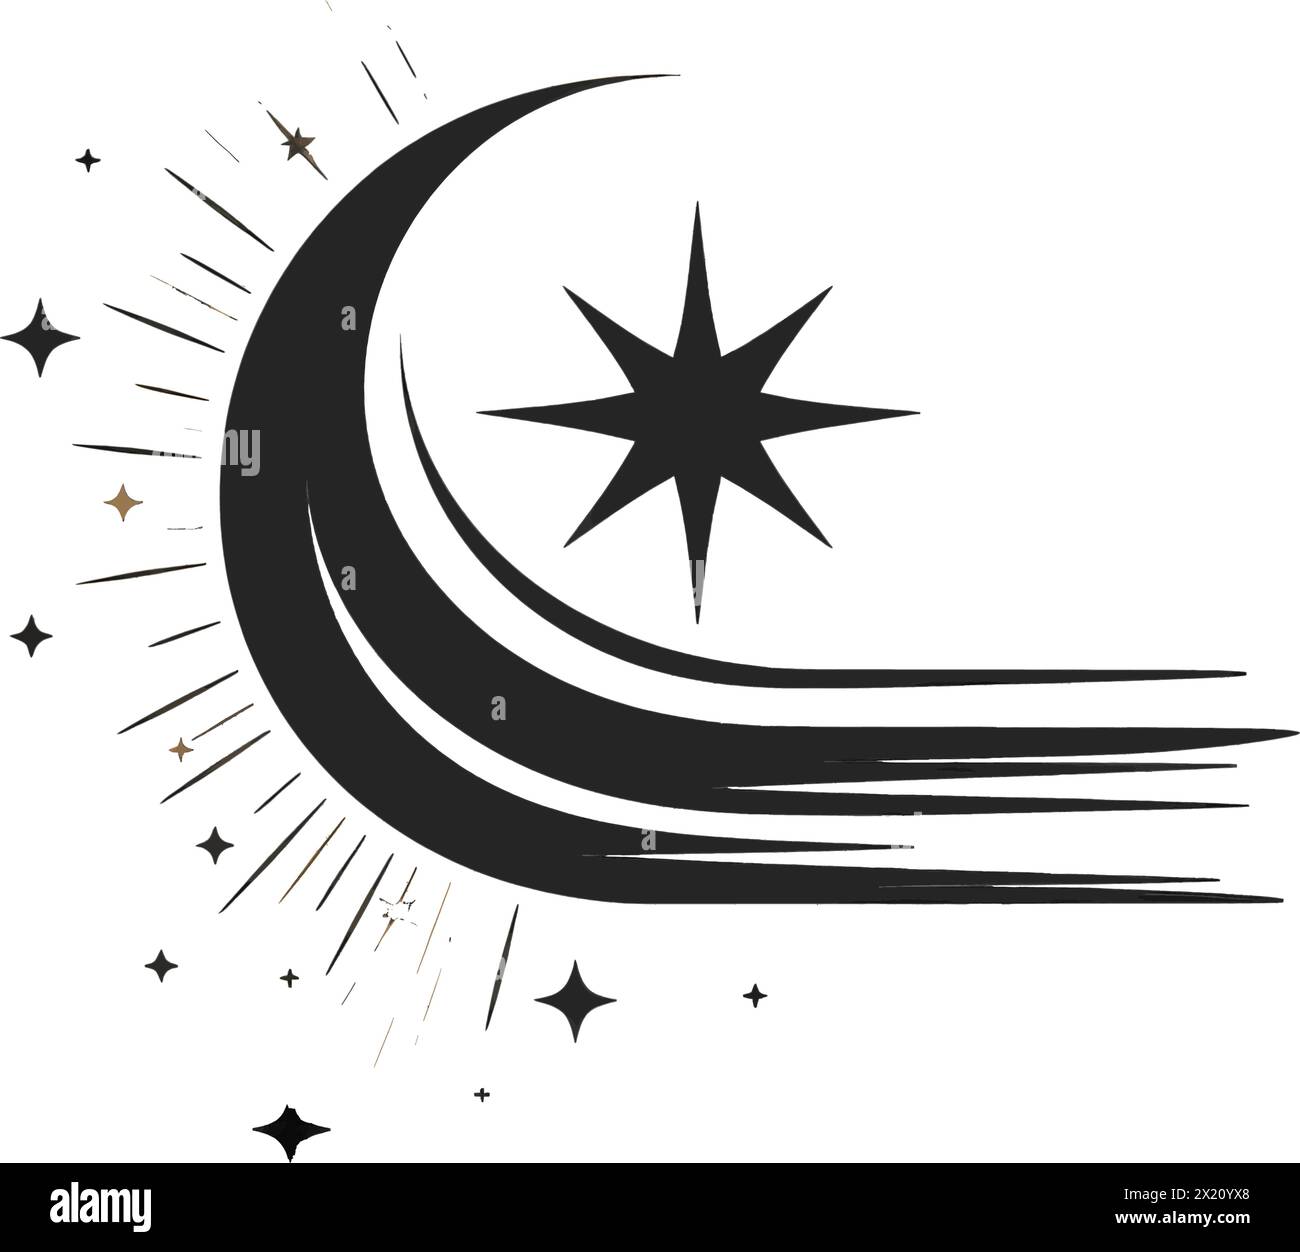 Vector illustration of stars and wave in black silhouette against a clean white background, capturing graceful forms of this vector. Stock Vector